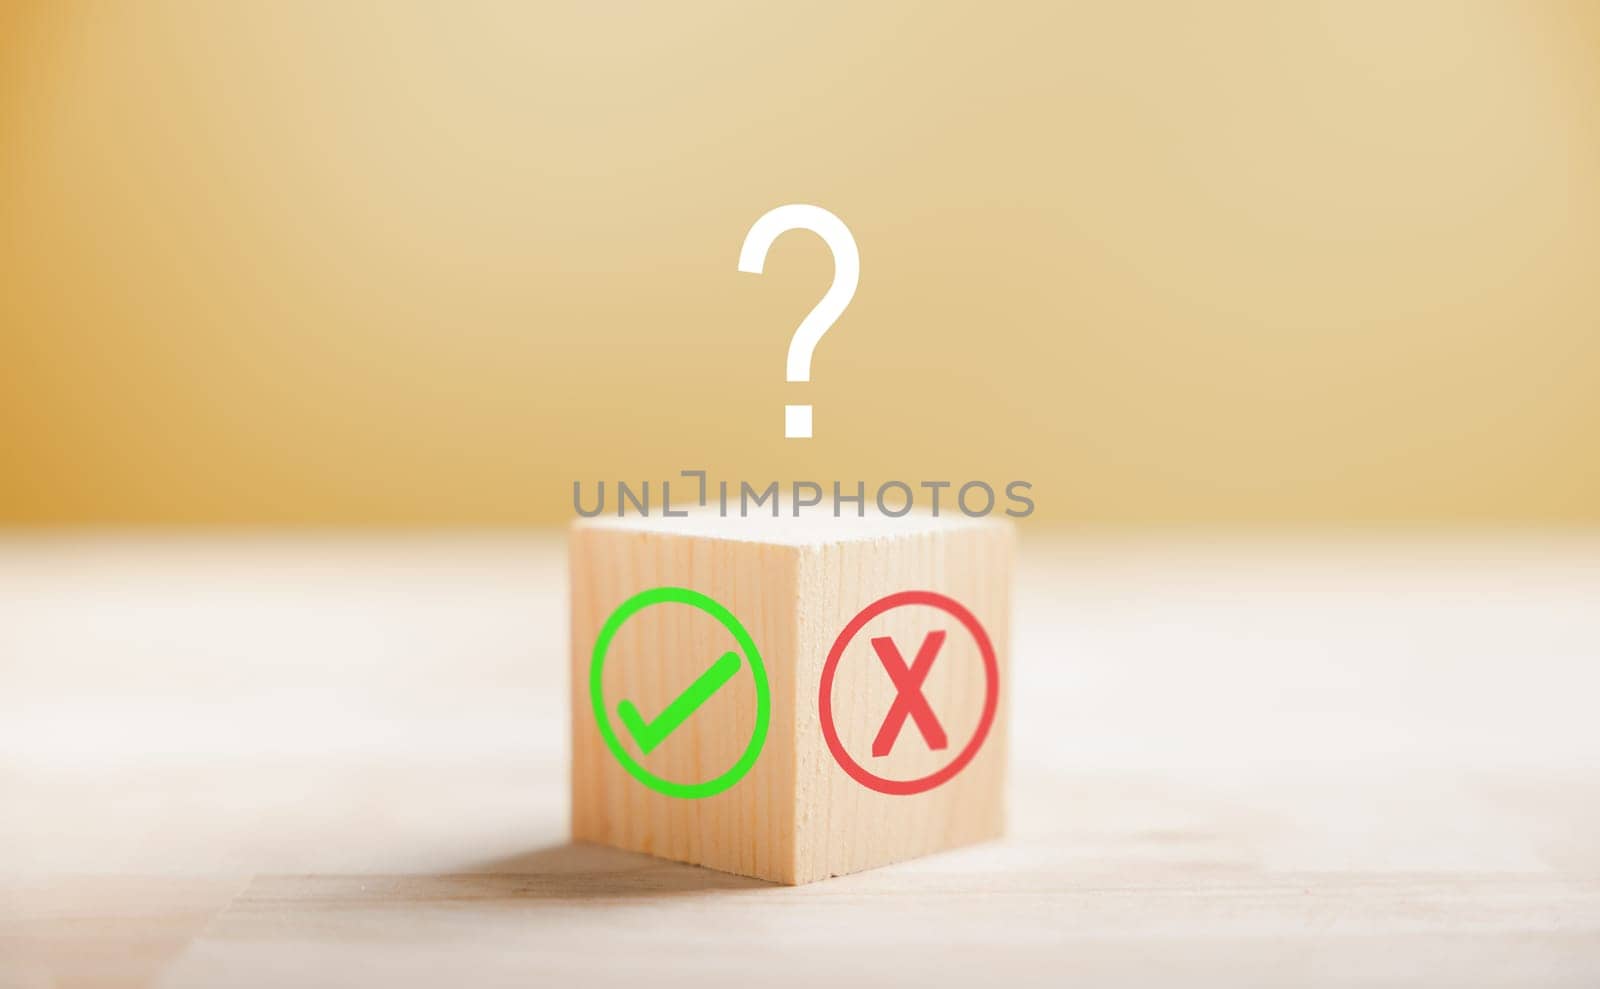 Wooden block illustrates choice with green check mark and red x. Decision-making concept highlighted. Think With Yes Or No Choice.